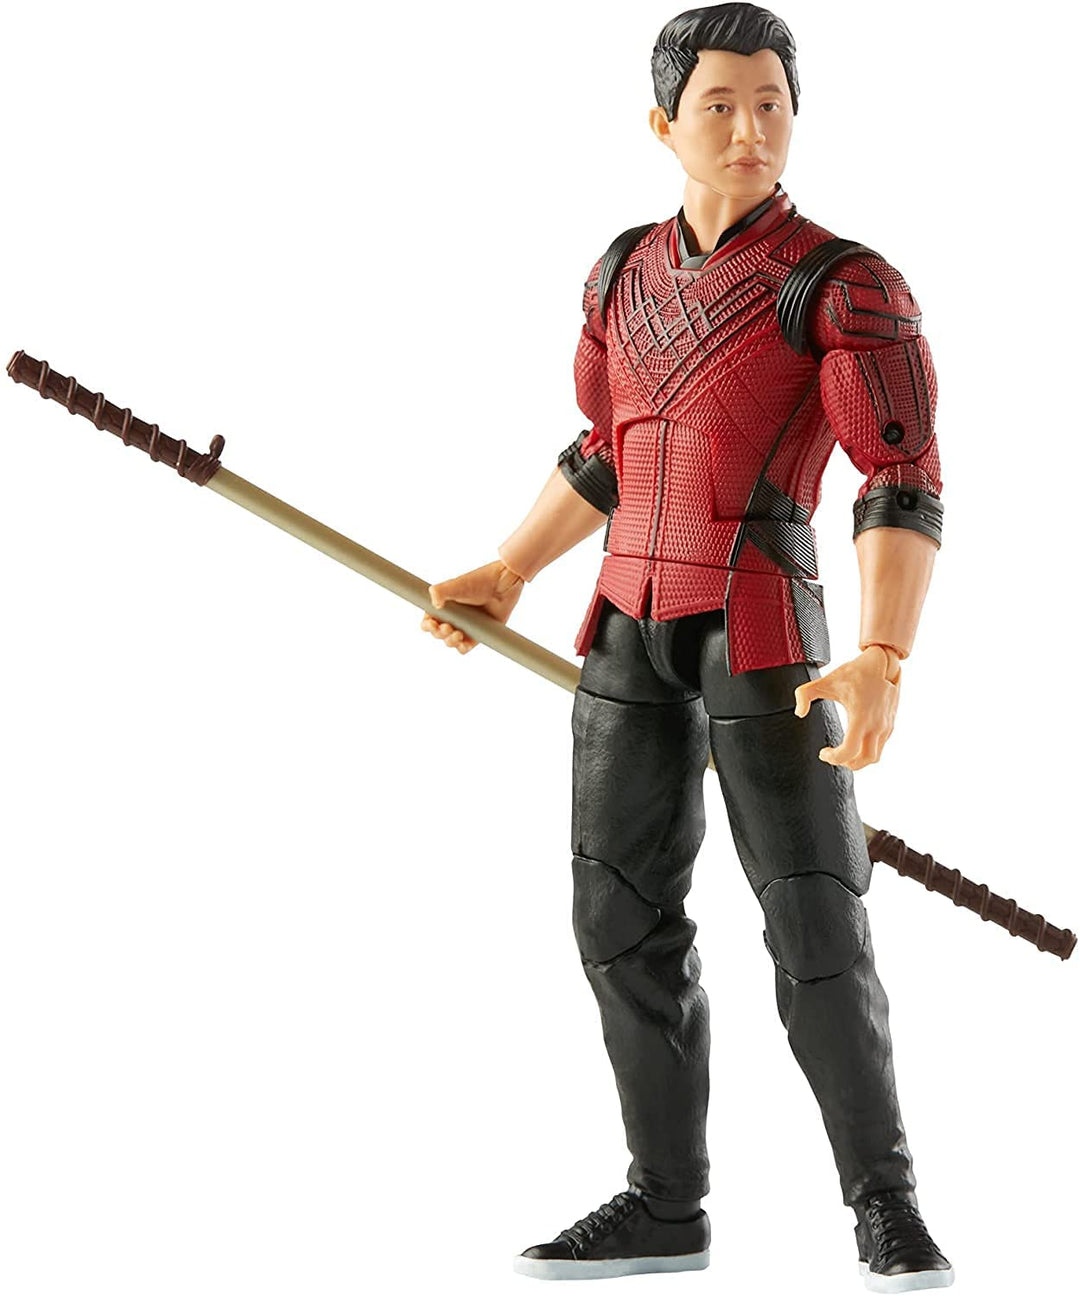 Shang Chi , F0247 Hasbro Marvel Legends Series and the Legend of the Ten Rings 15-cm Collectible Action Figure Toy for Ages 4 and Up